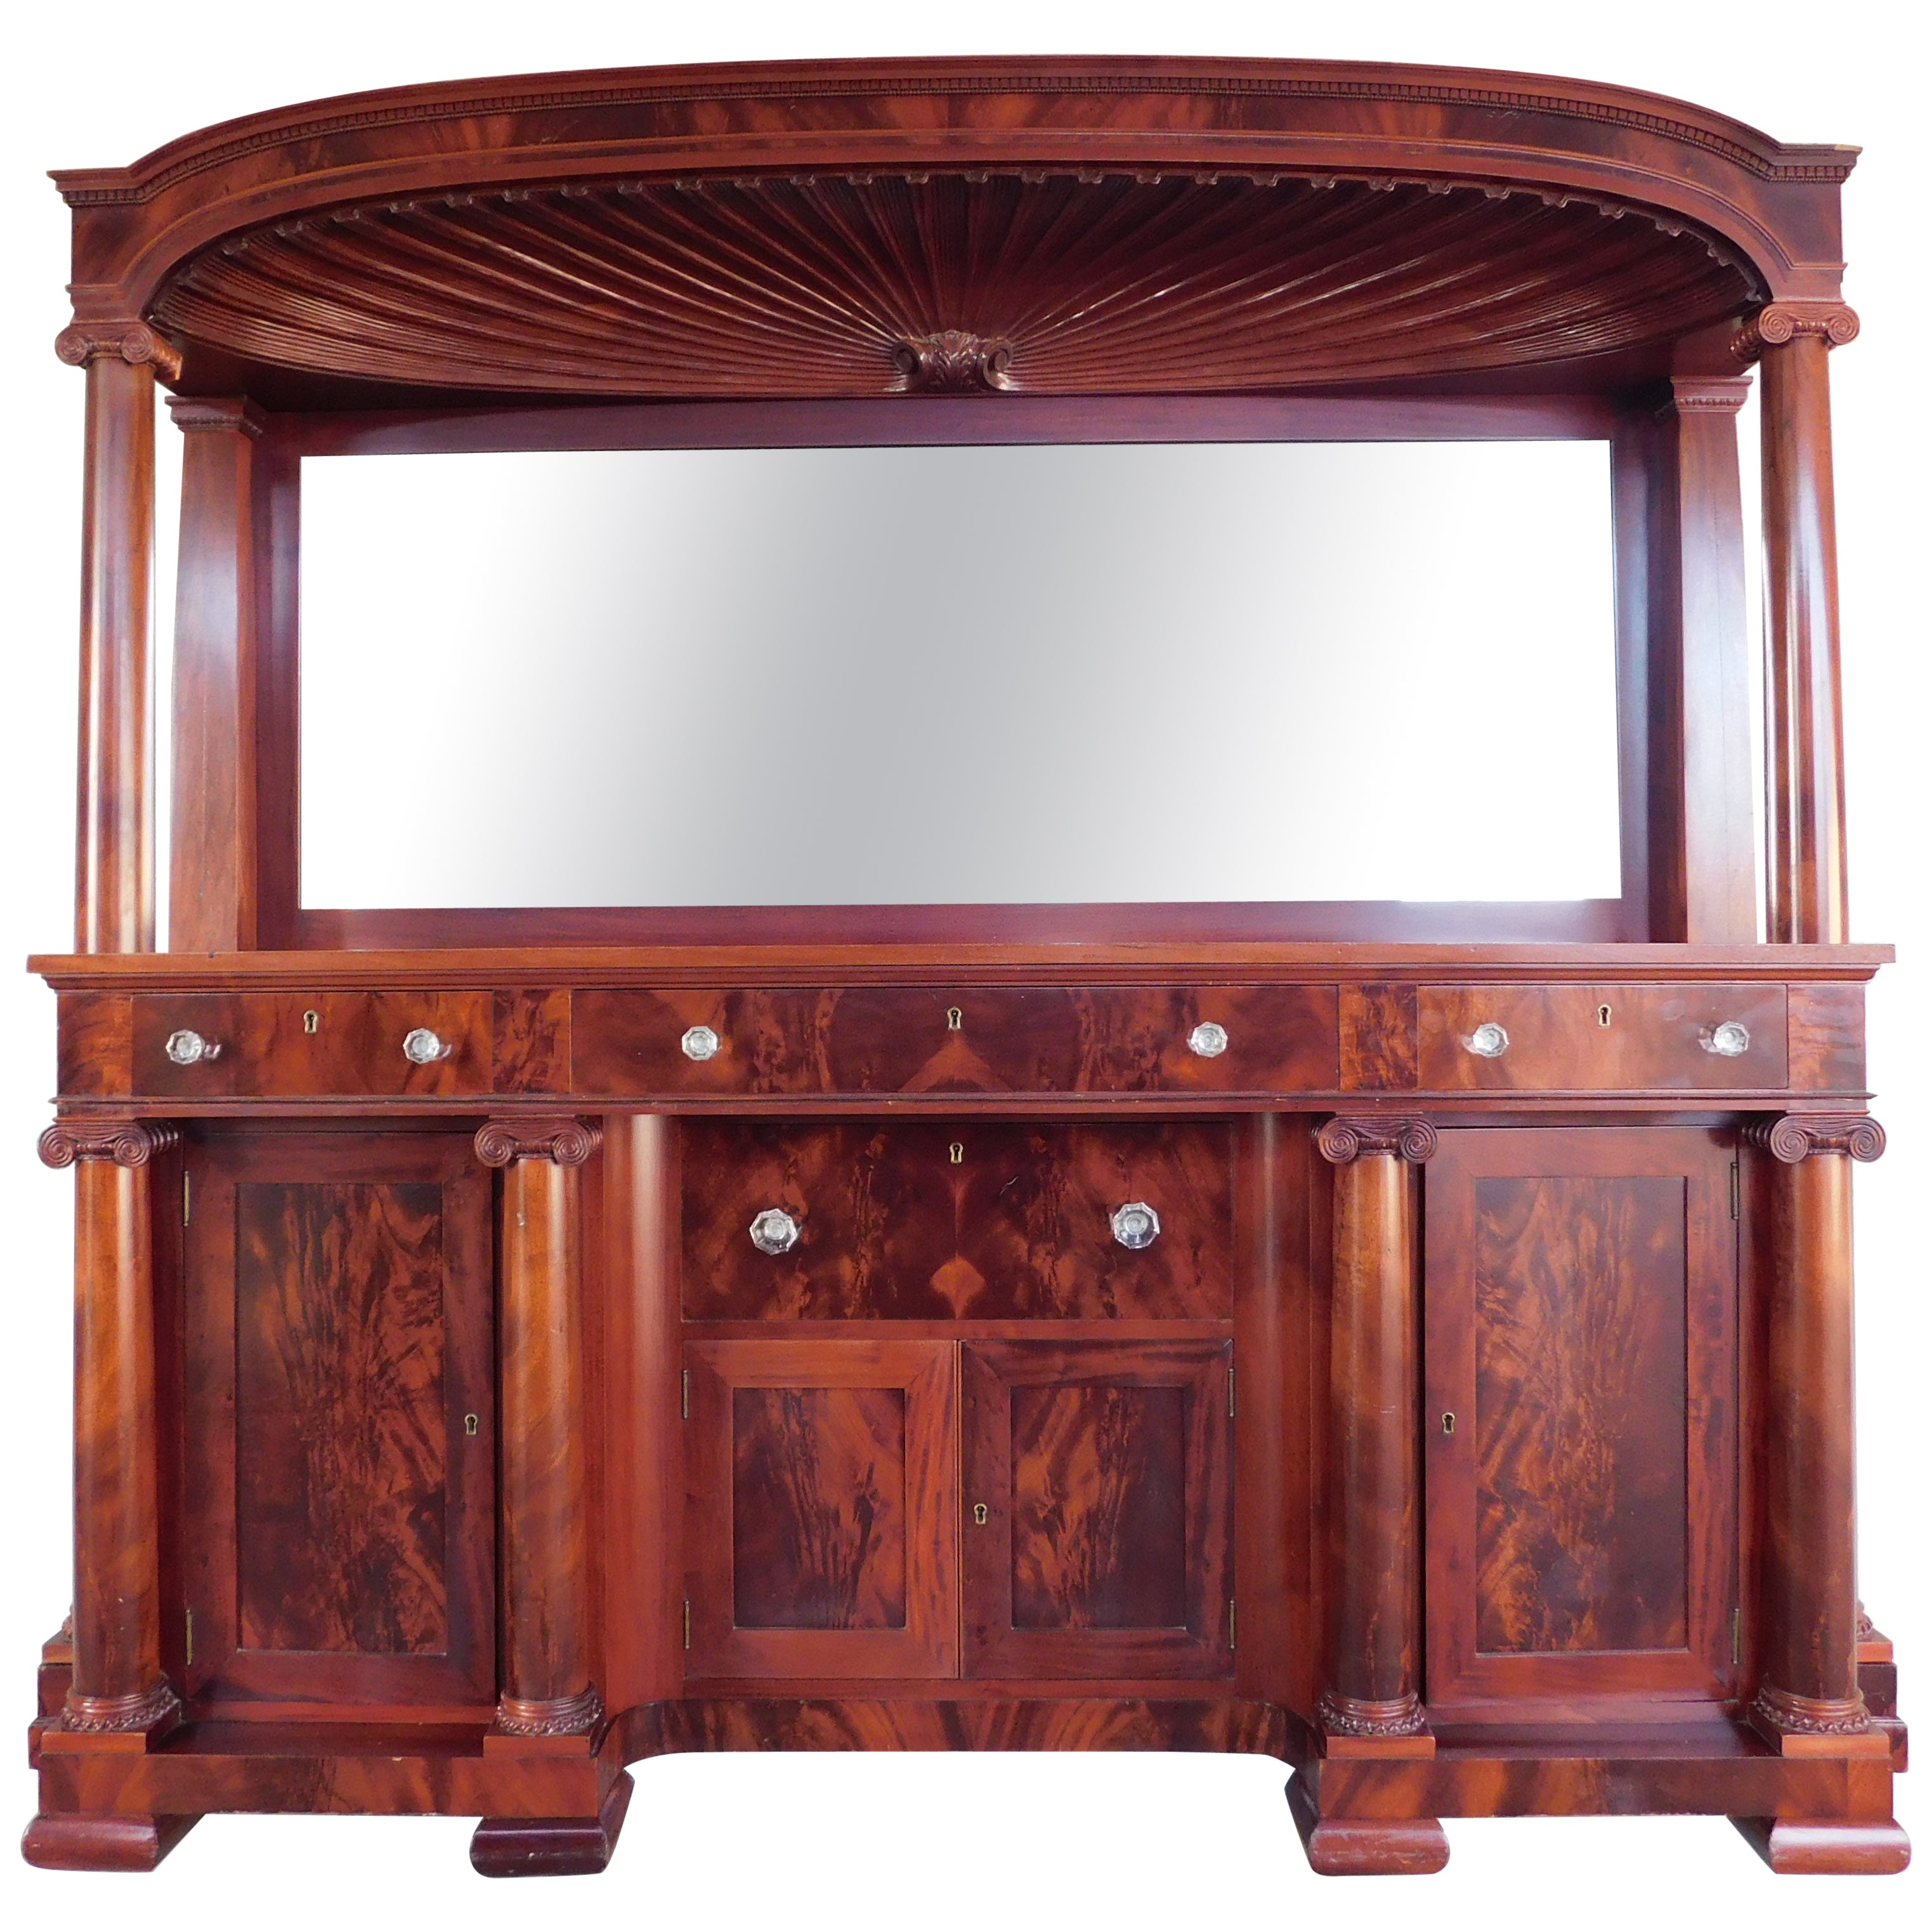 Antique Early 20th Century Mahogany Empire Revival Sideboard For Sale